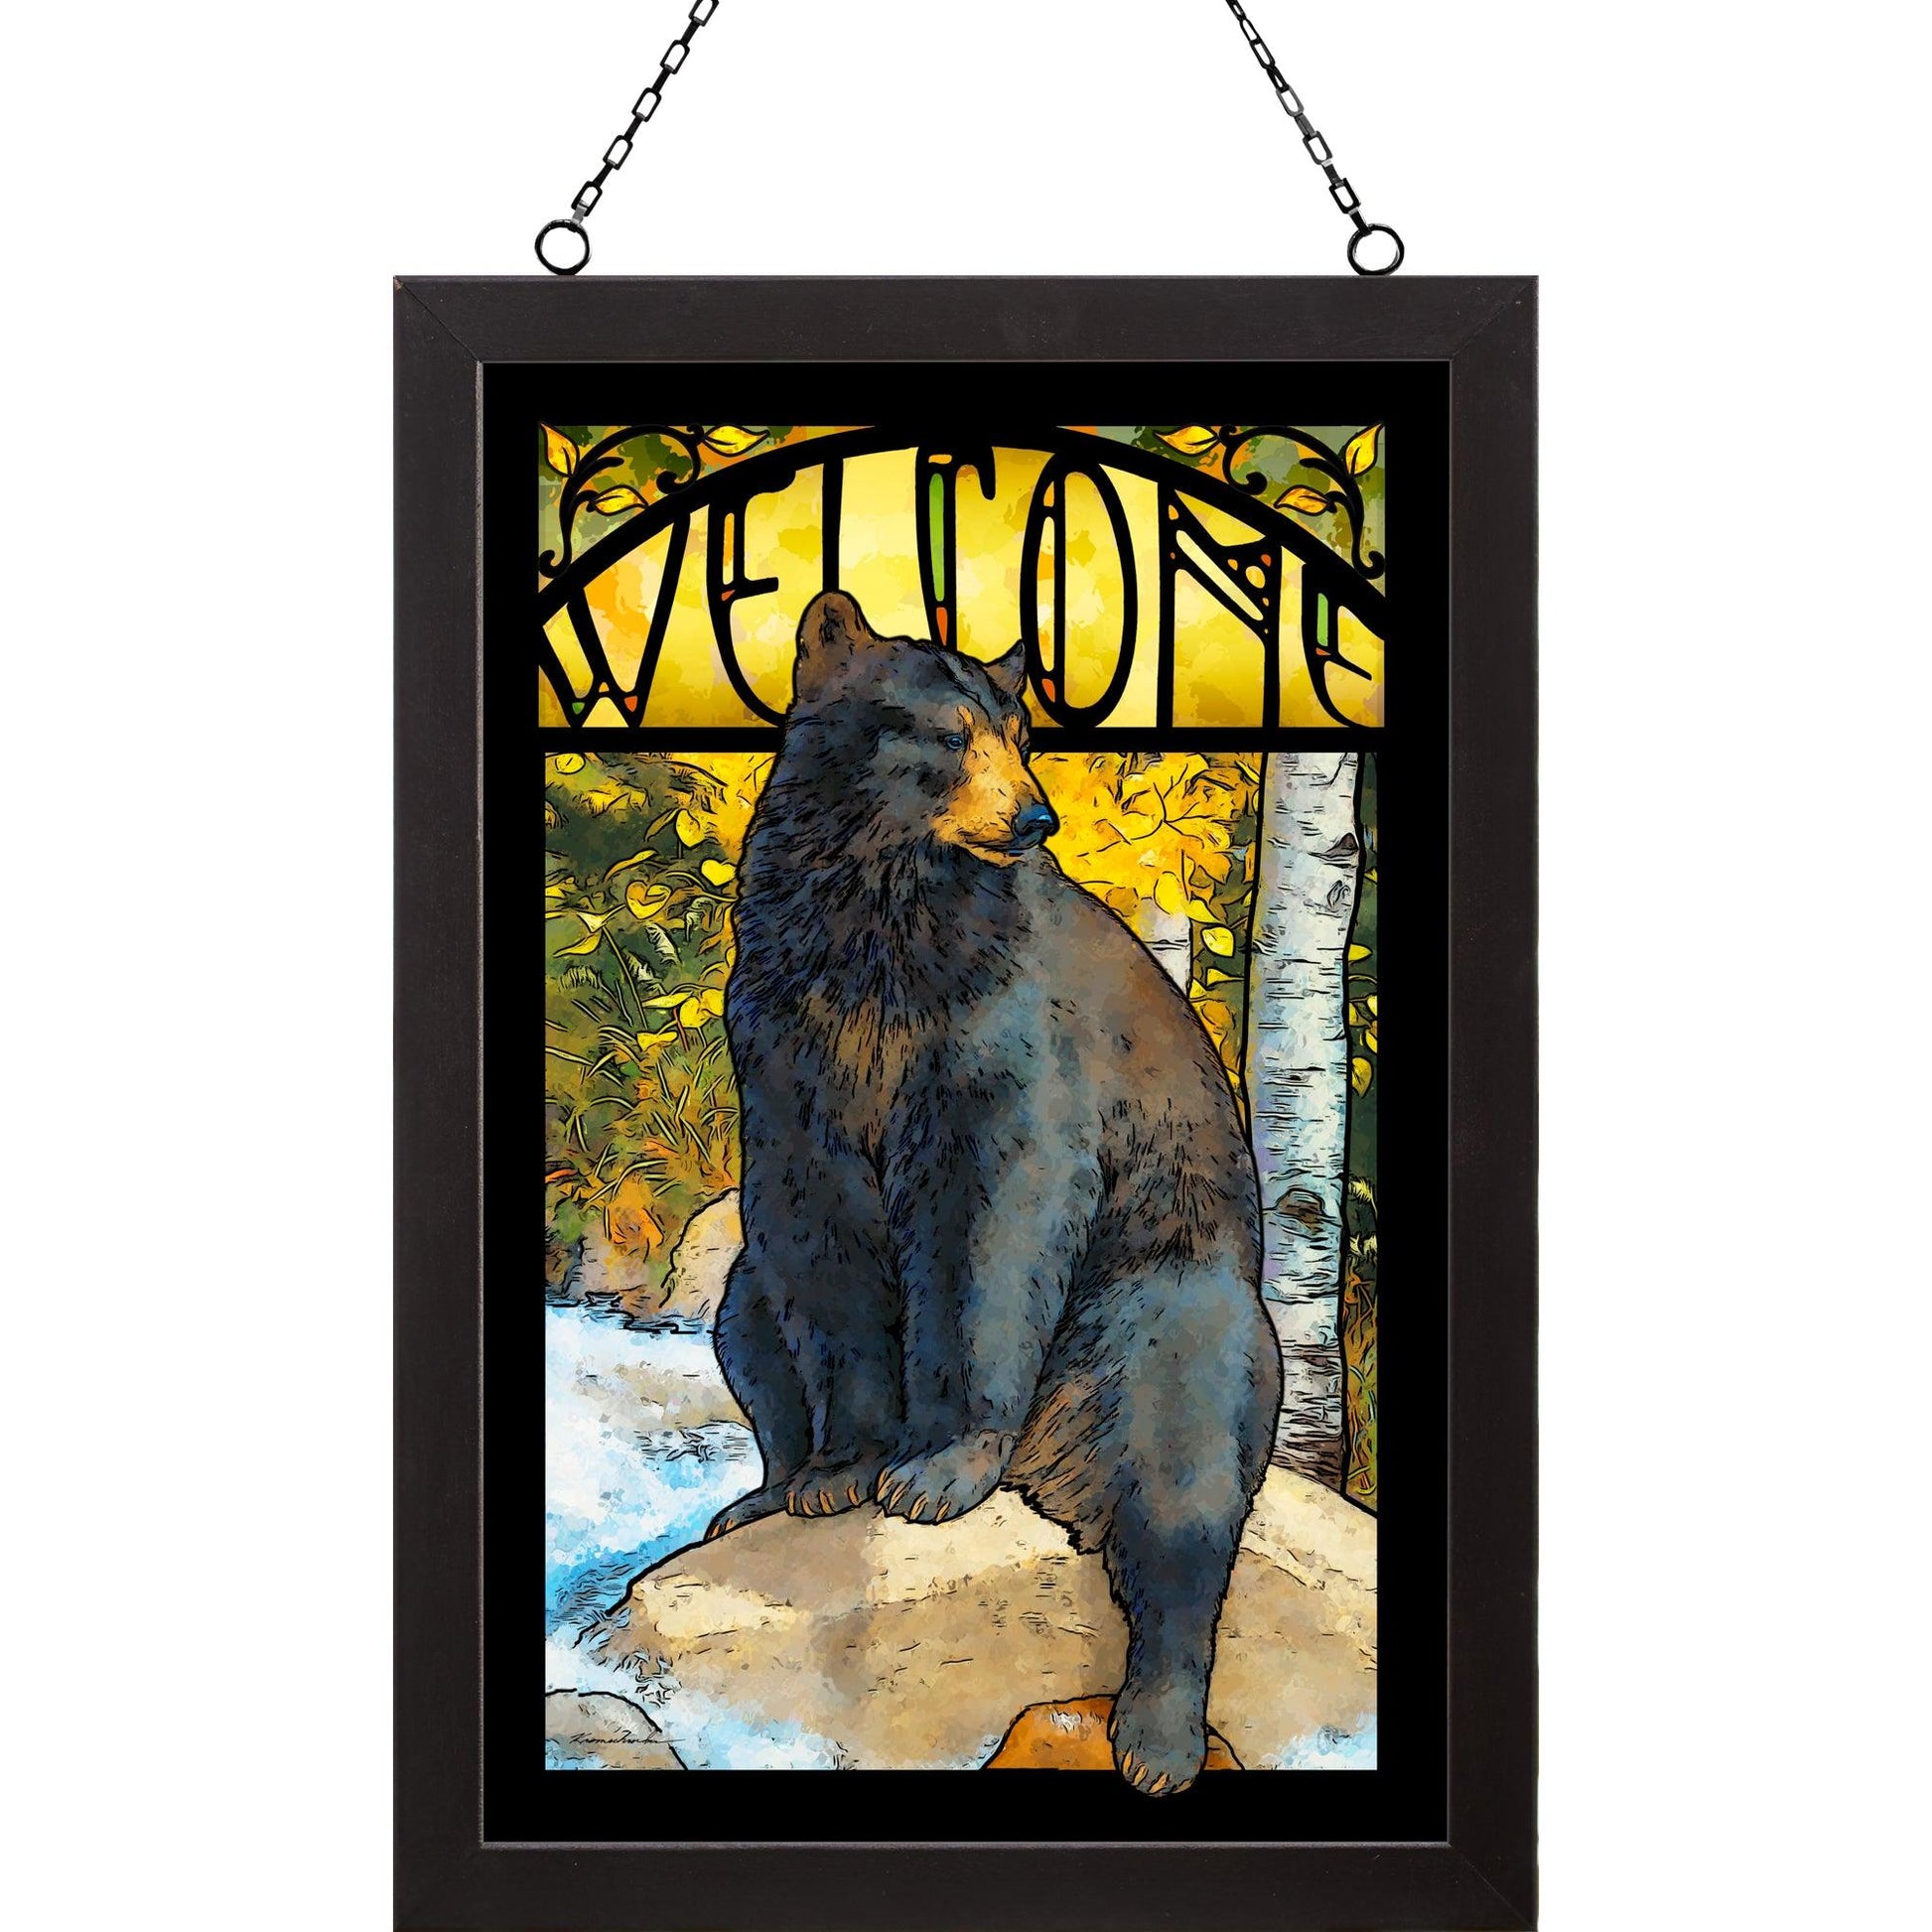 The Paws That Refreshes - Black Bear Stained Glass Art - Wild Wings